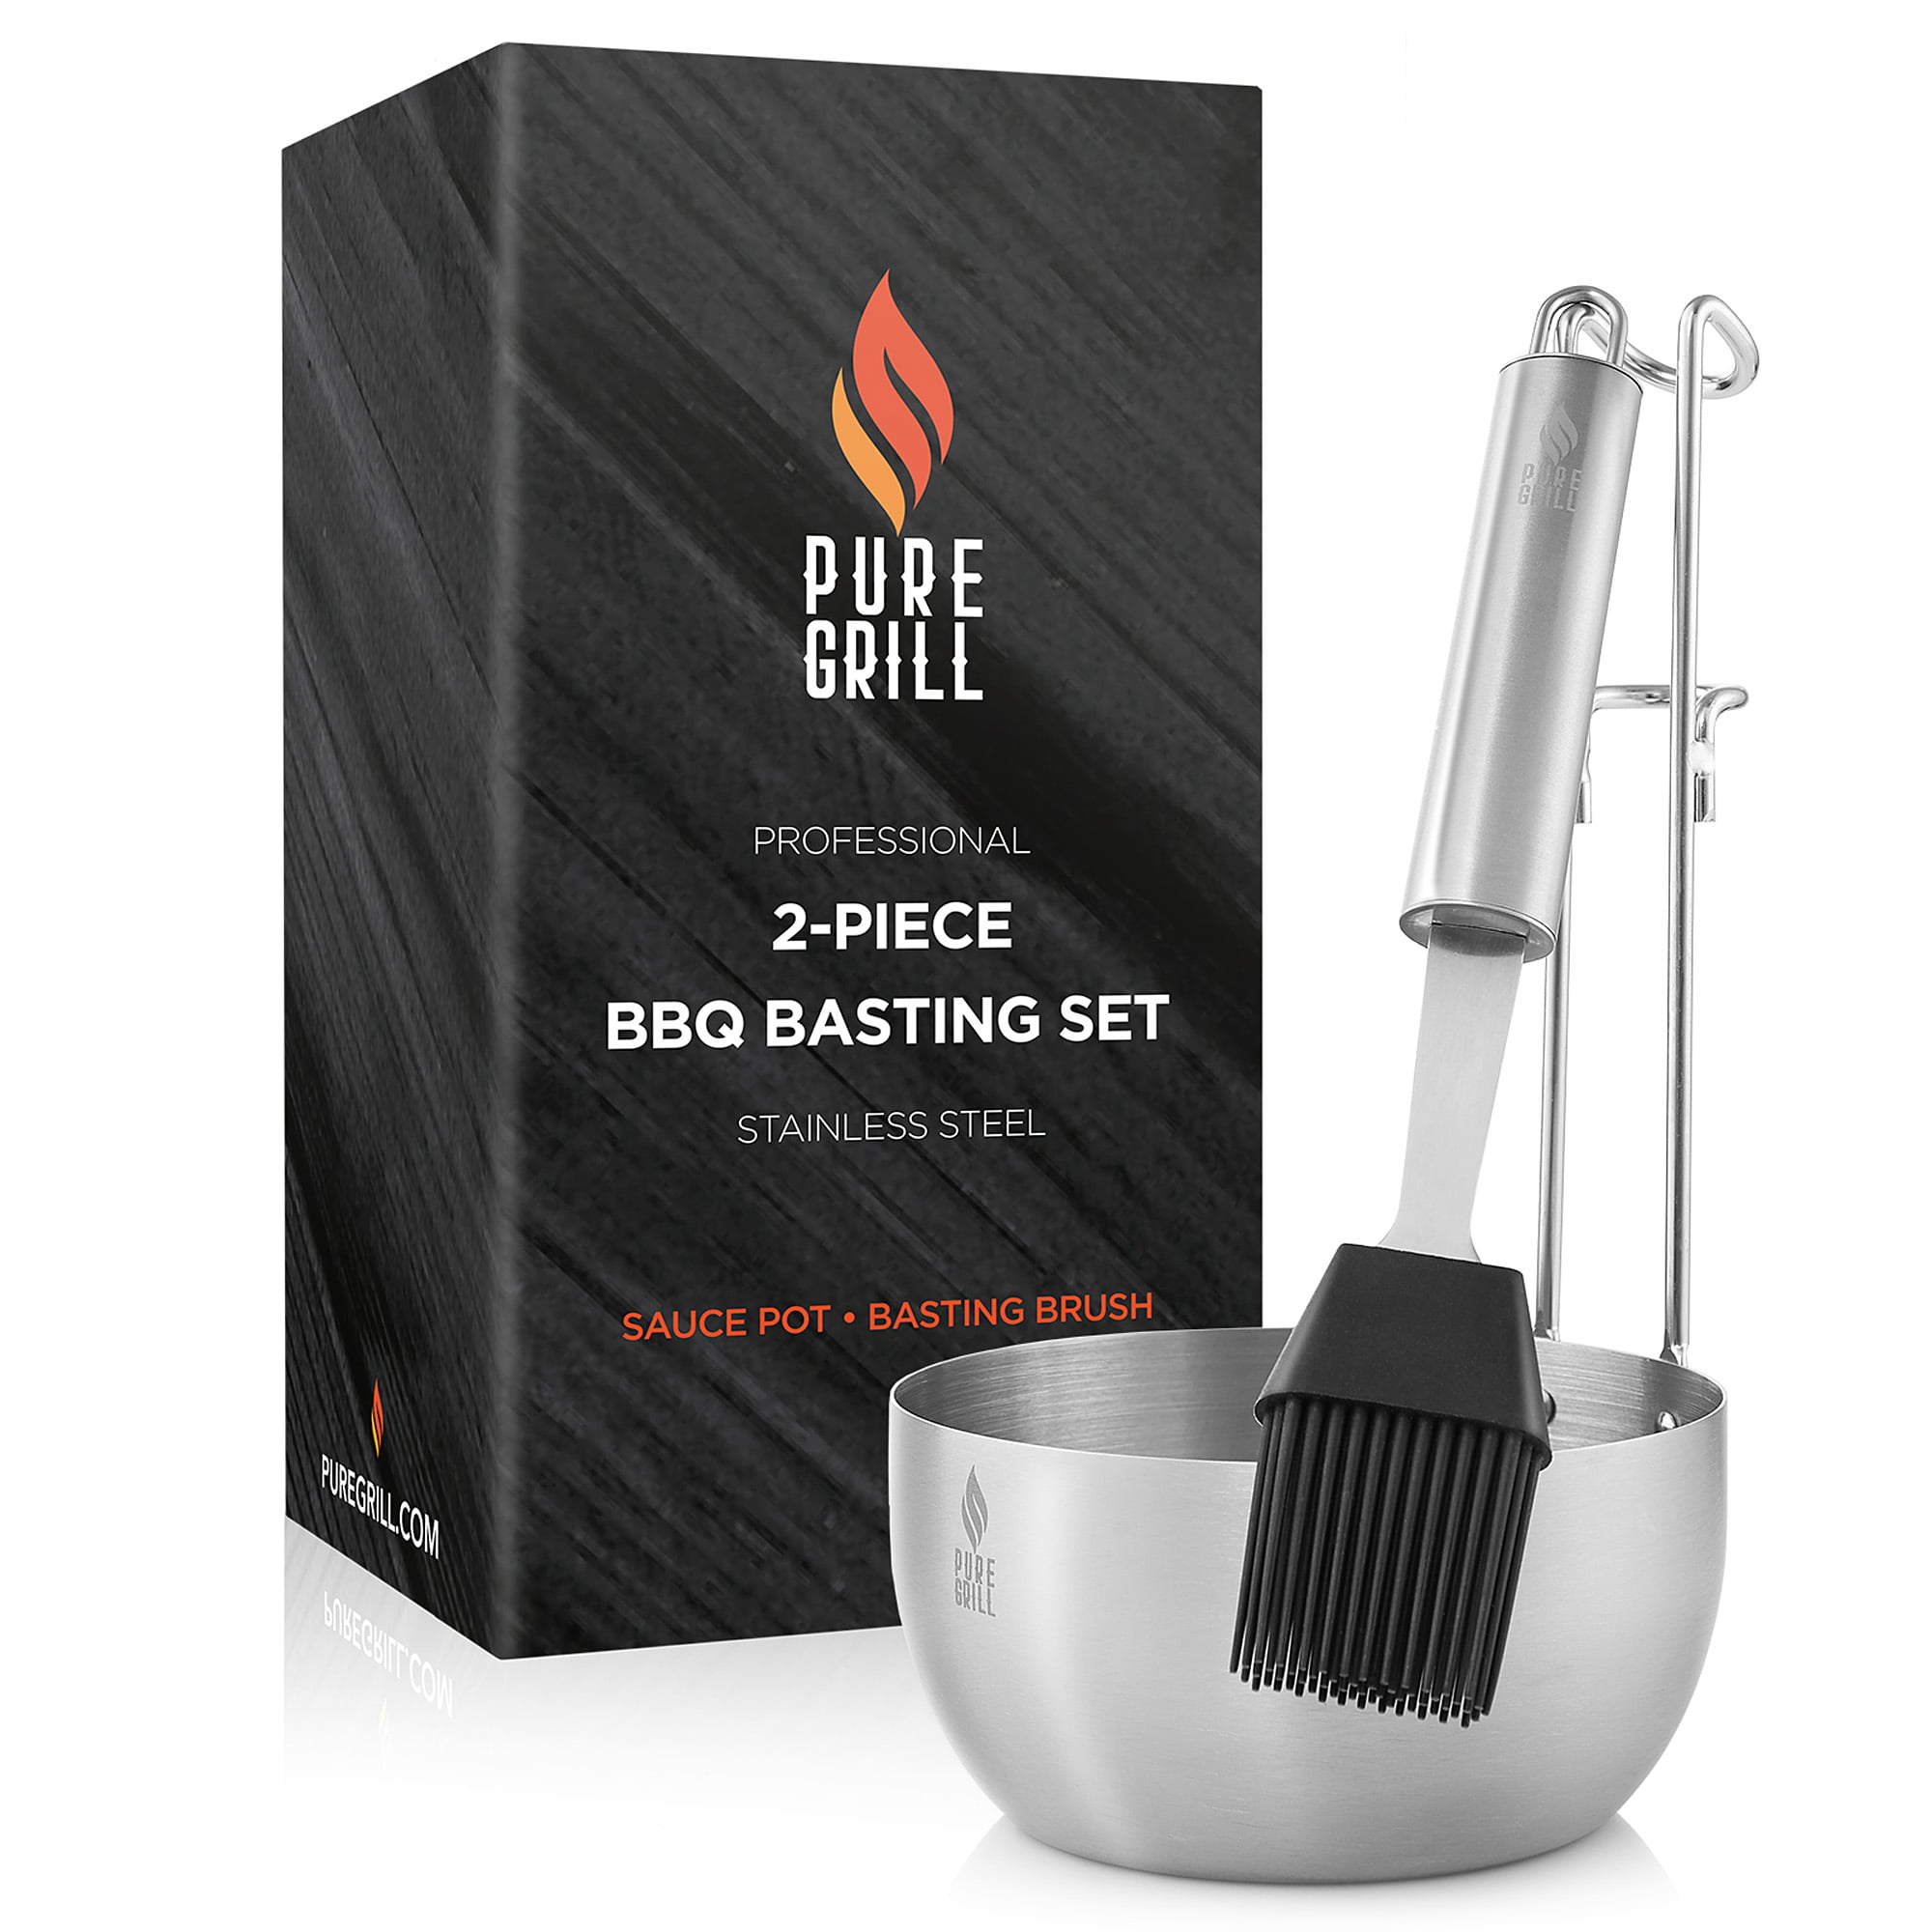 32 OZ Stainless Steel Barbecue Sauce Pot with Silicon Basting Brush by Qidea BBQ Basting Pot with Basting Brush 